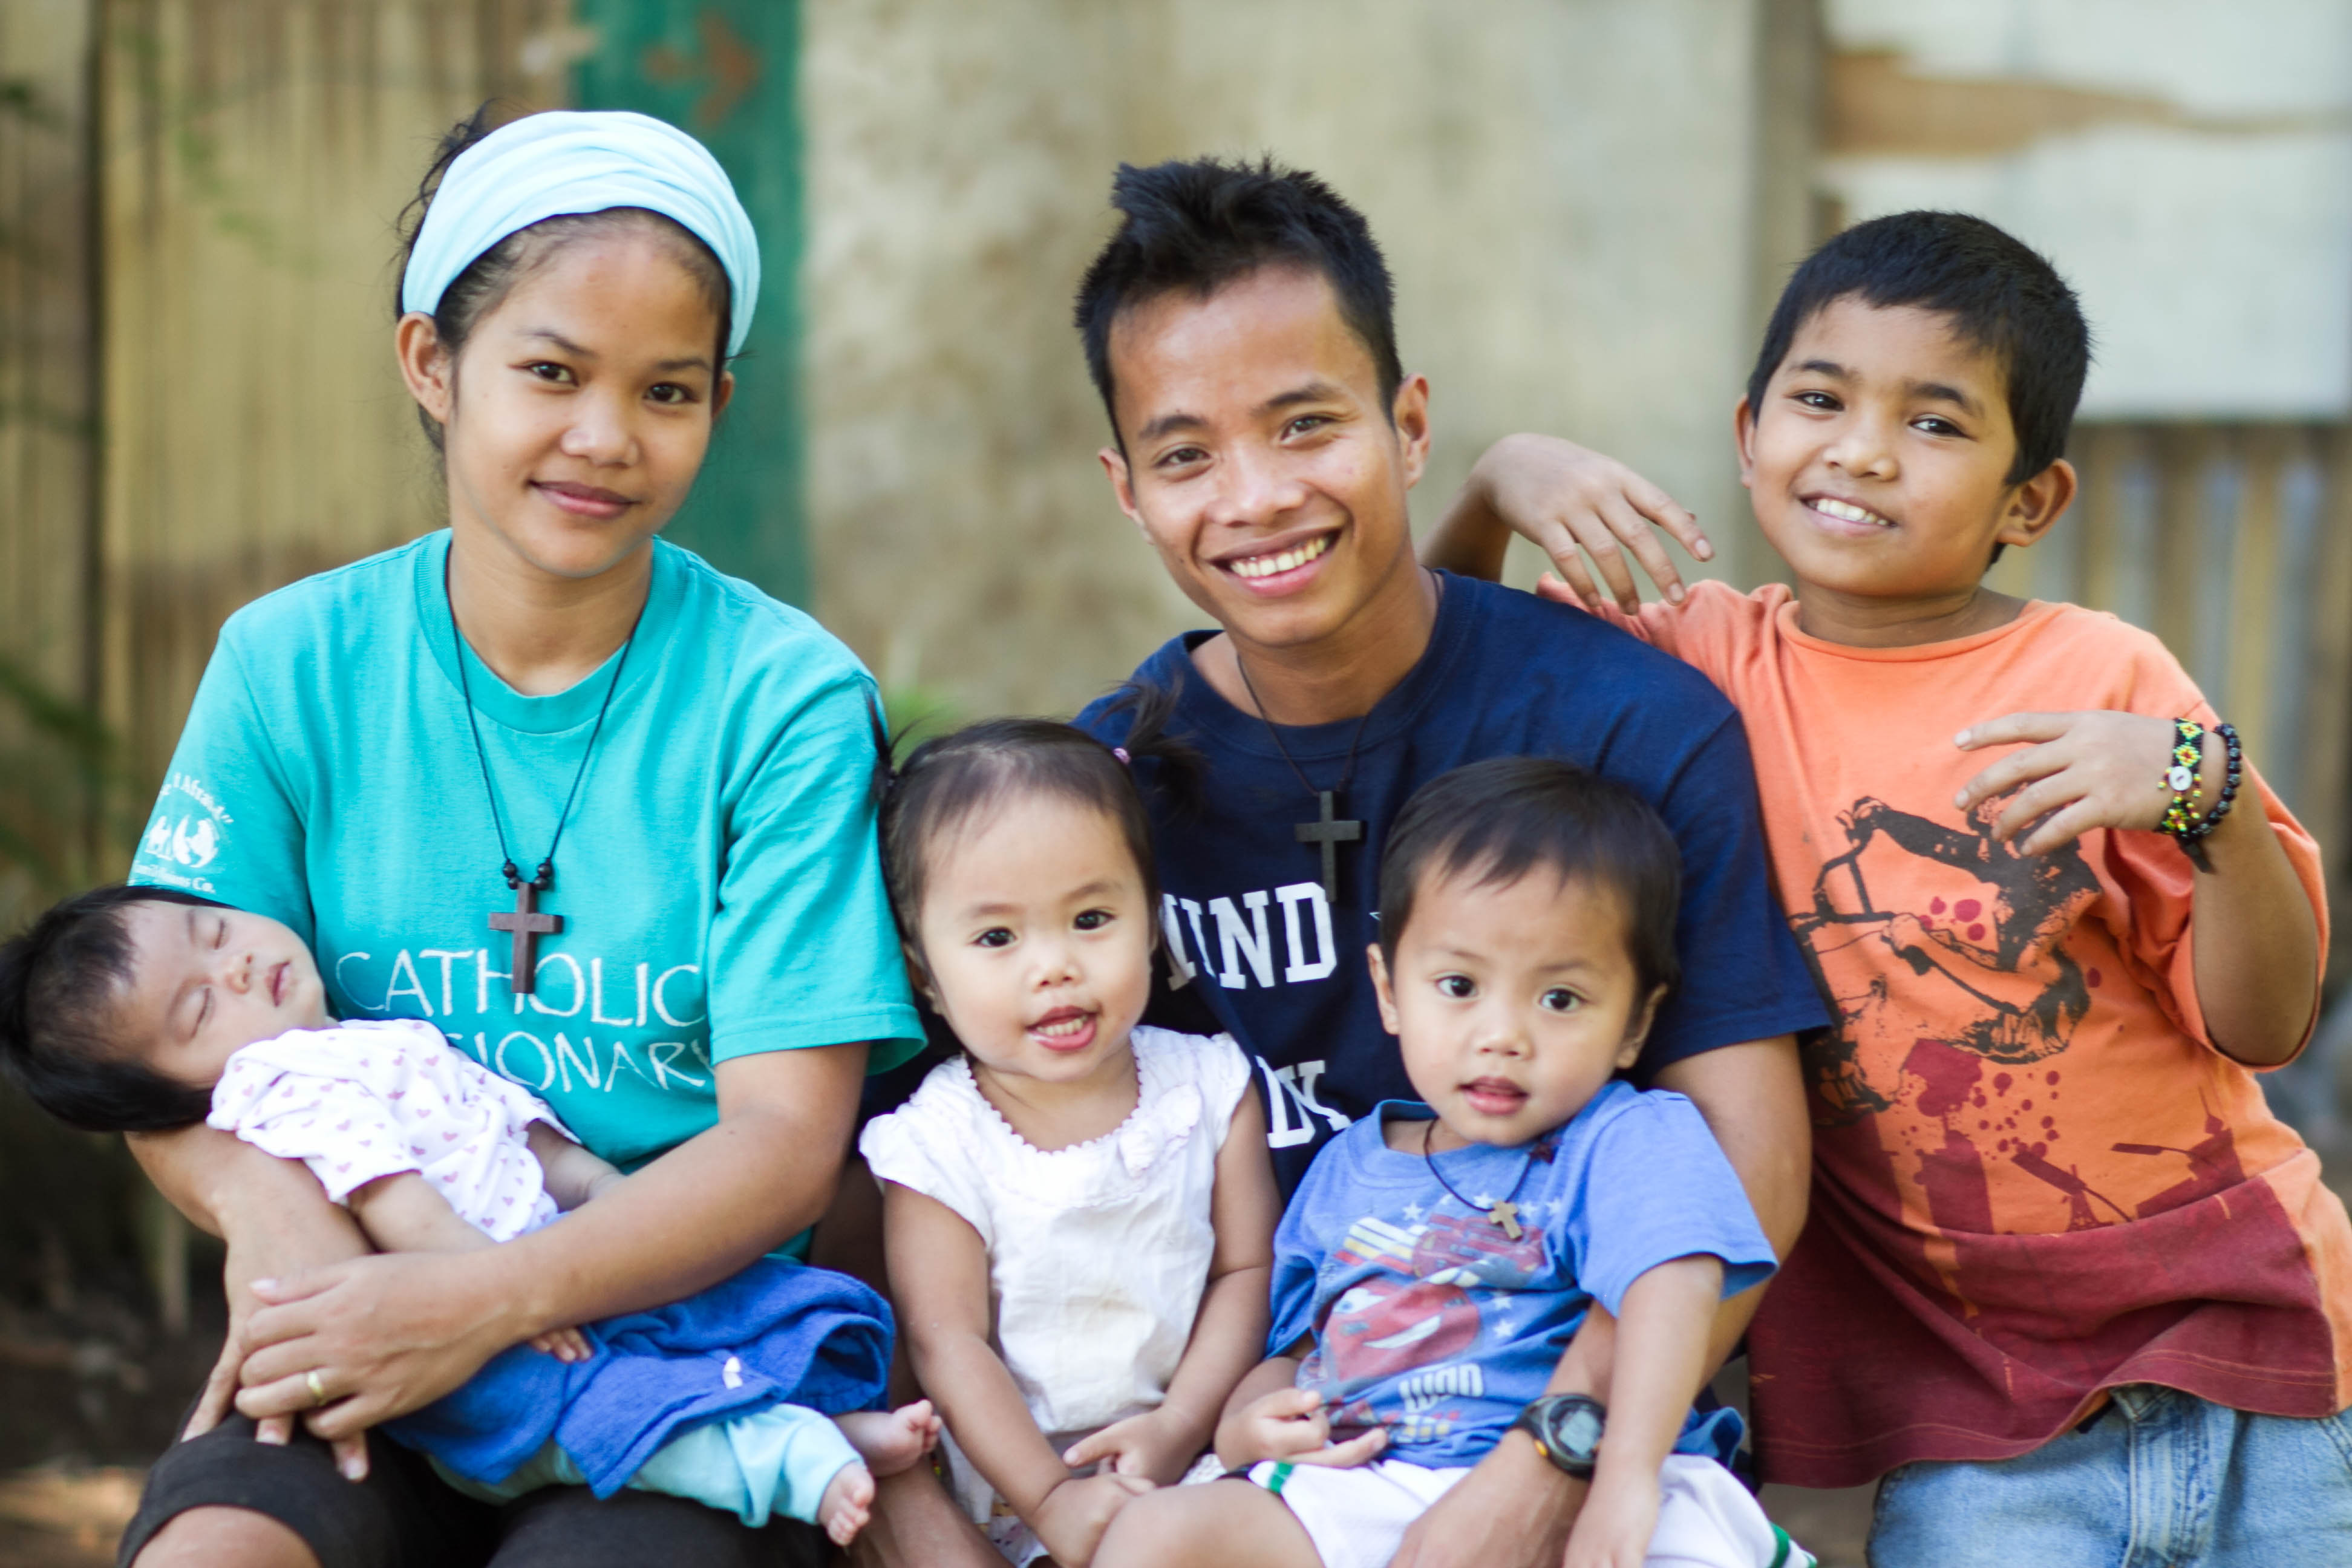 Meet Our Missionaries - Lay Catholic MissionariesFamily Missions Company